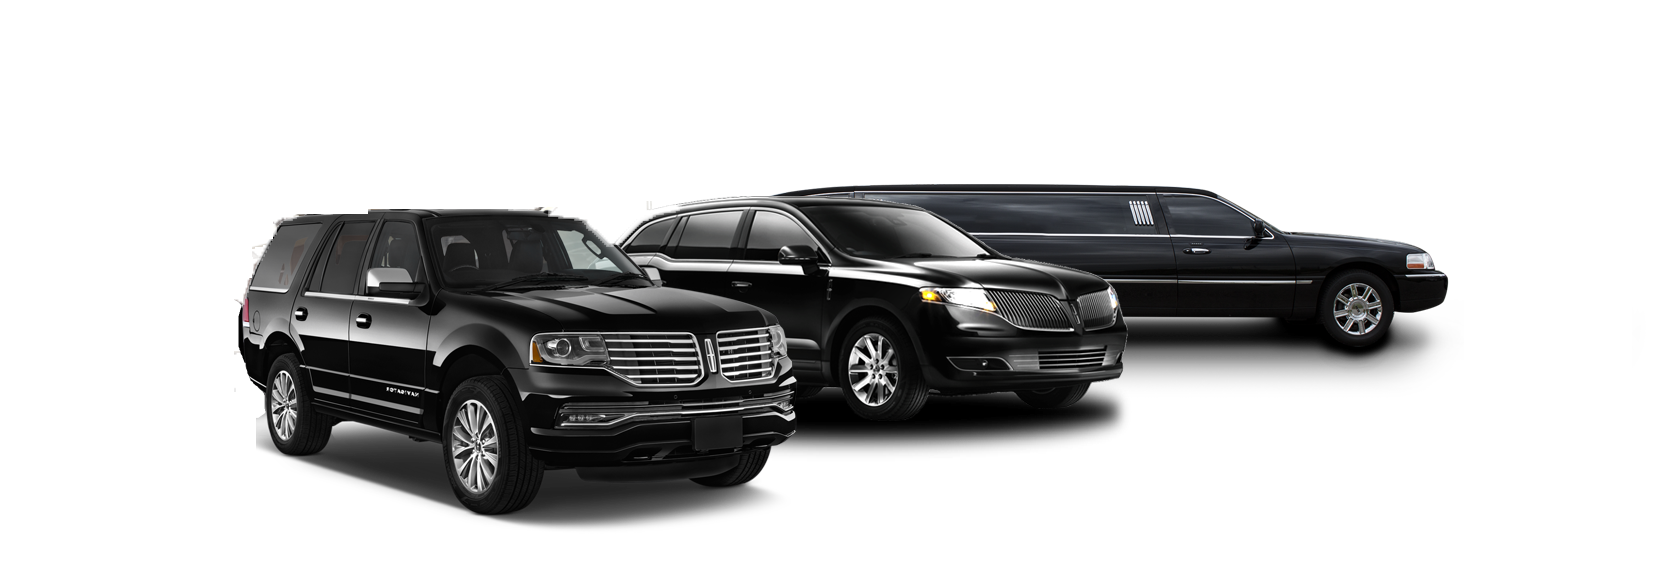 cheap best elgin ohare limo suv towncar